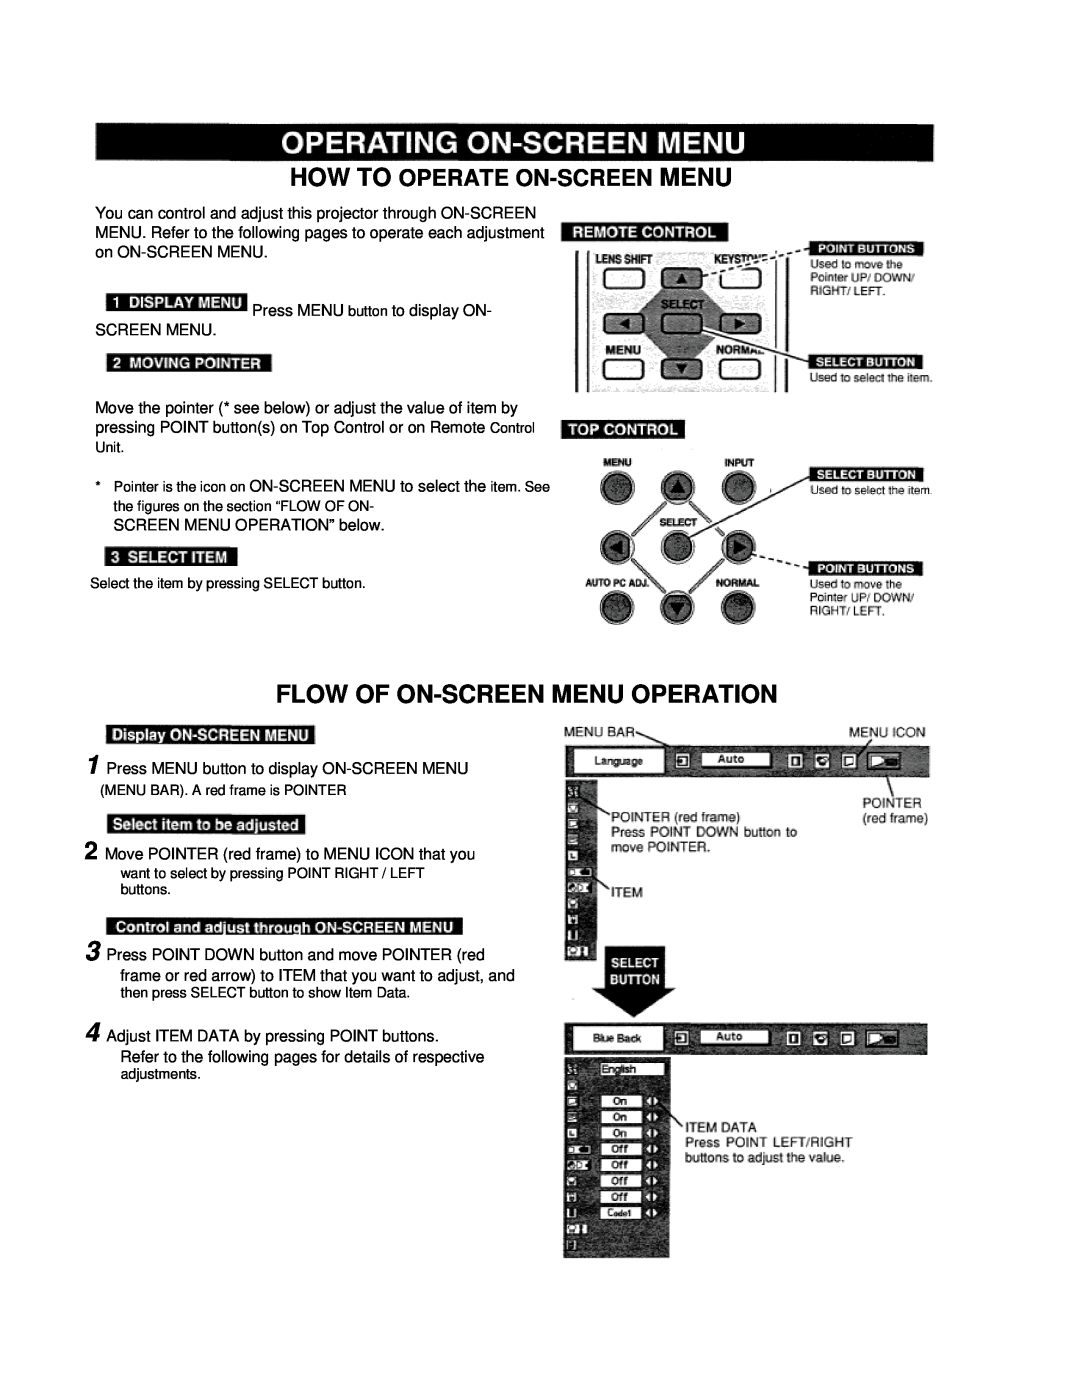 Eiki LC-VC1 owner manual Flow Of On-Screen Menu Operation, How To Operate On-Screen Menu 